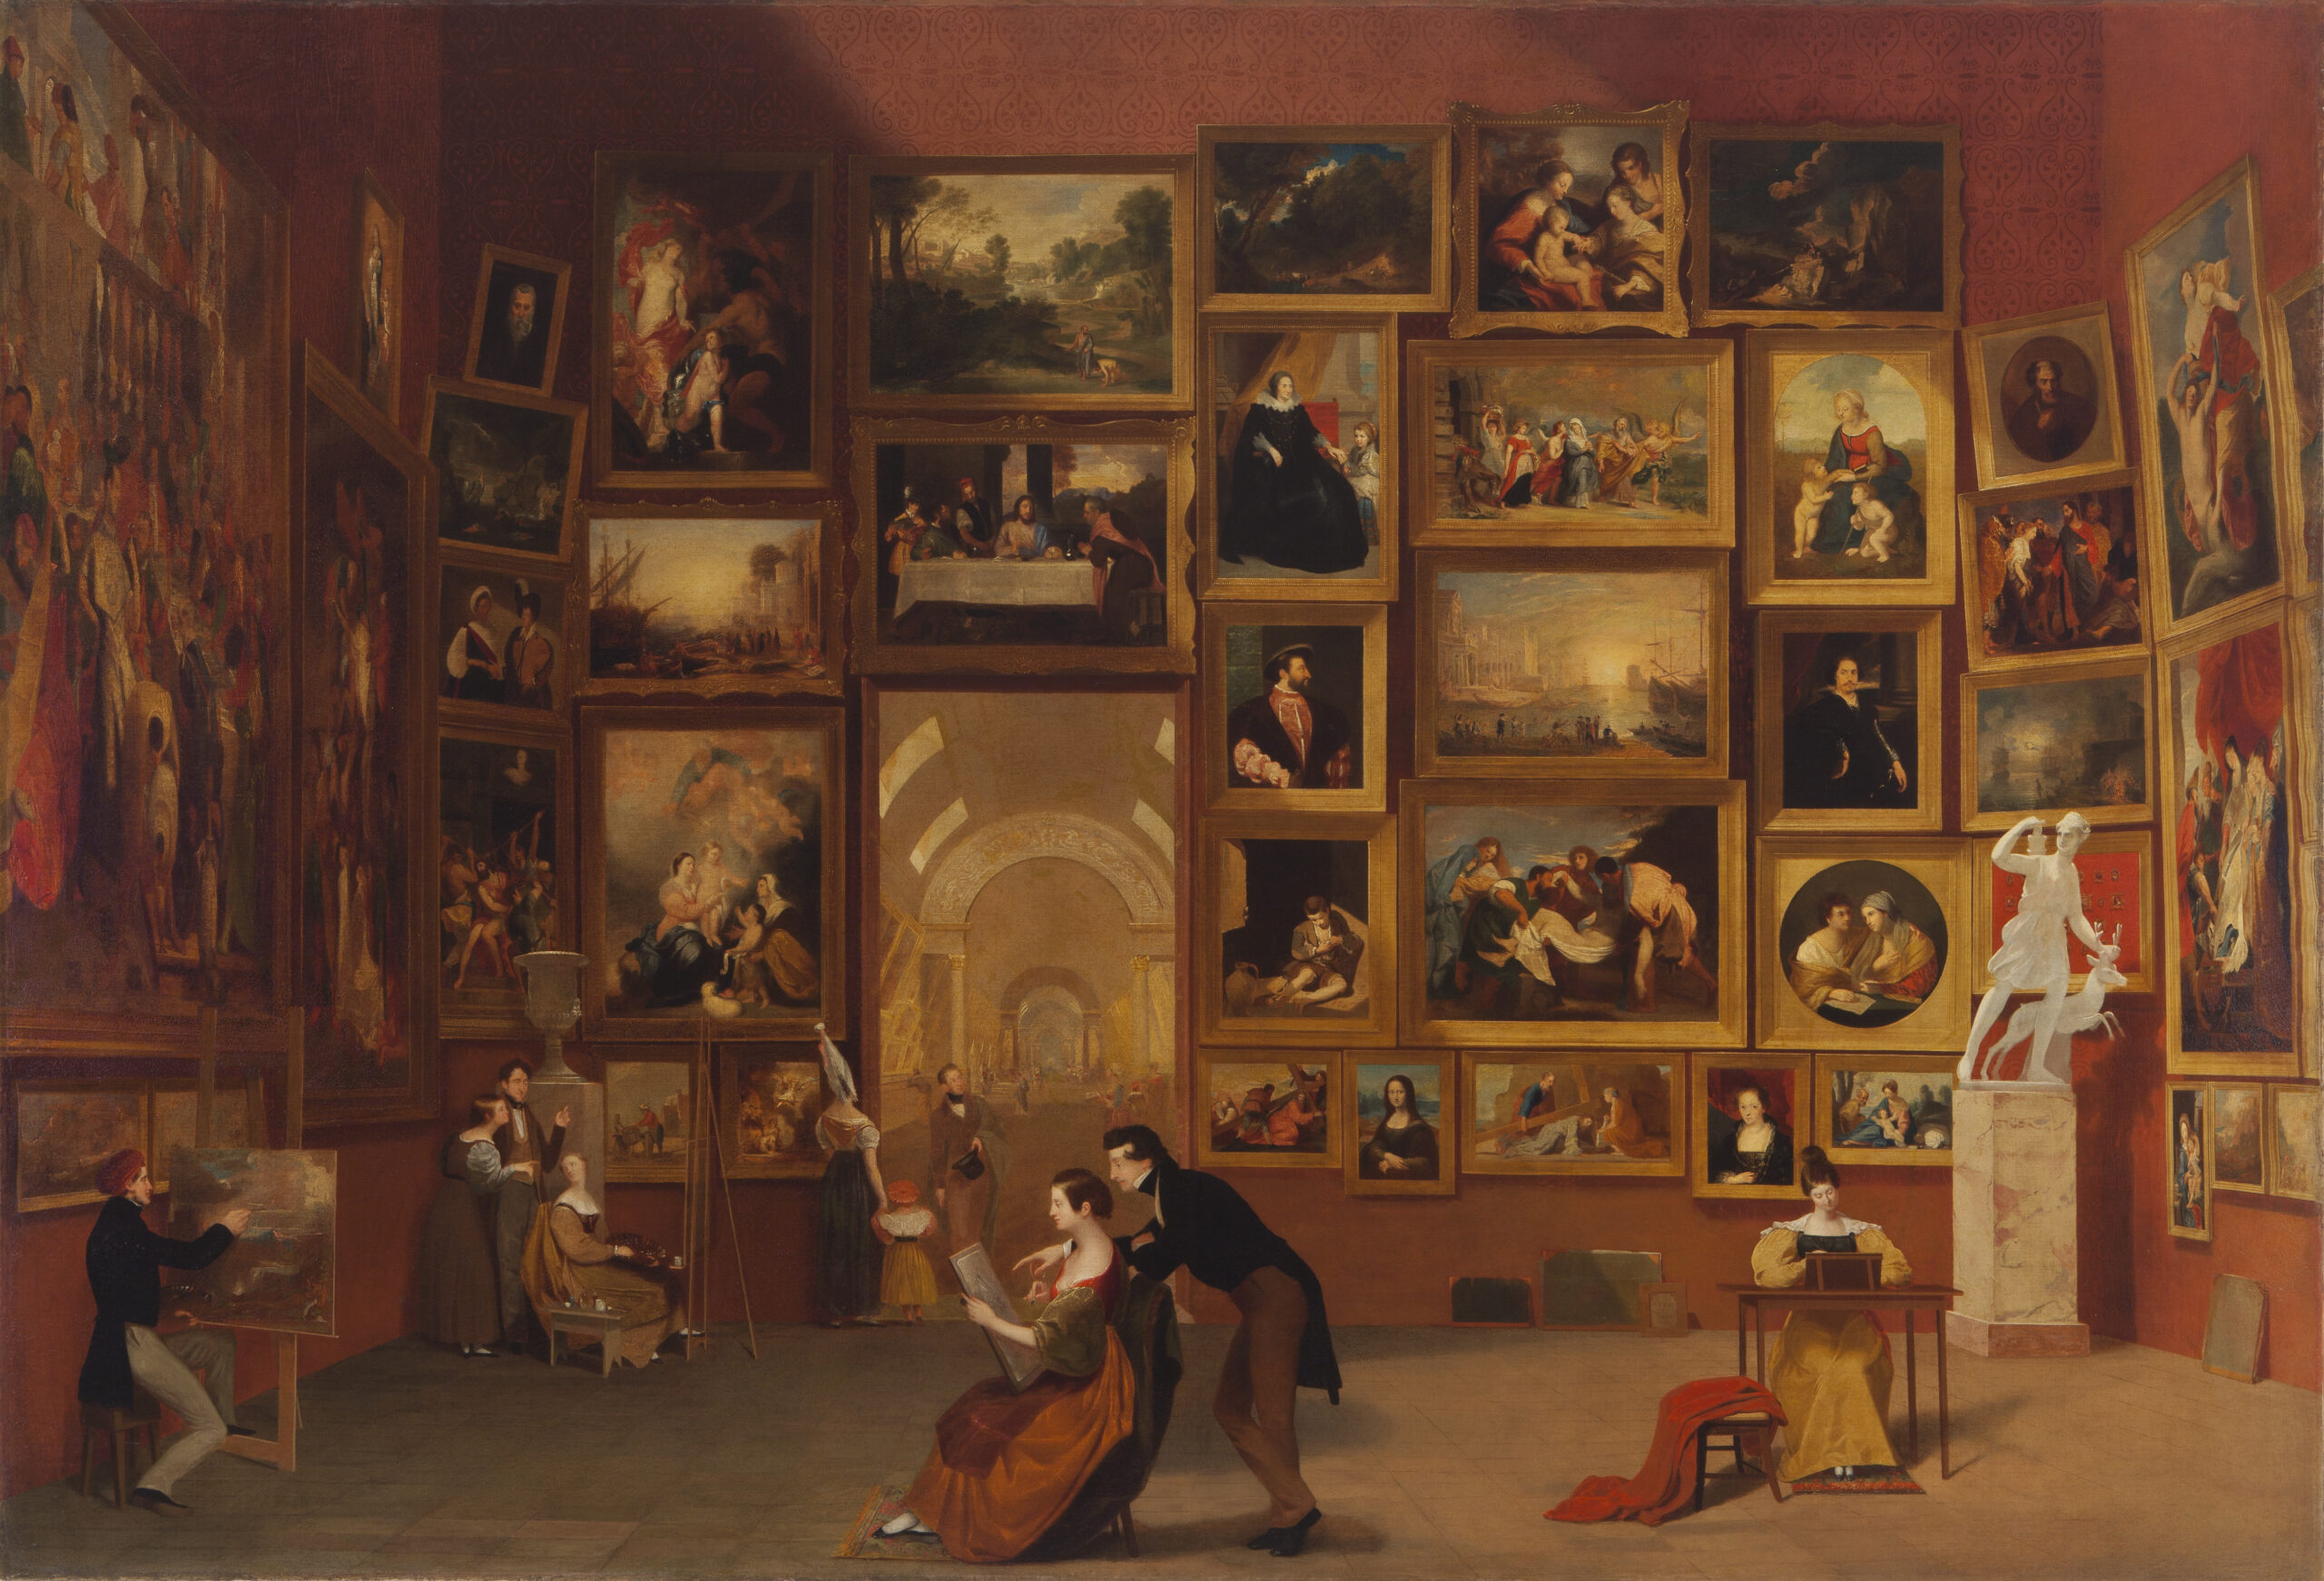 Painting of the Salon Carré in the Louvre art museum in Paris hung with masterpieces of European art primarily from the Renaissance and Baroque periods.